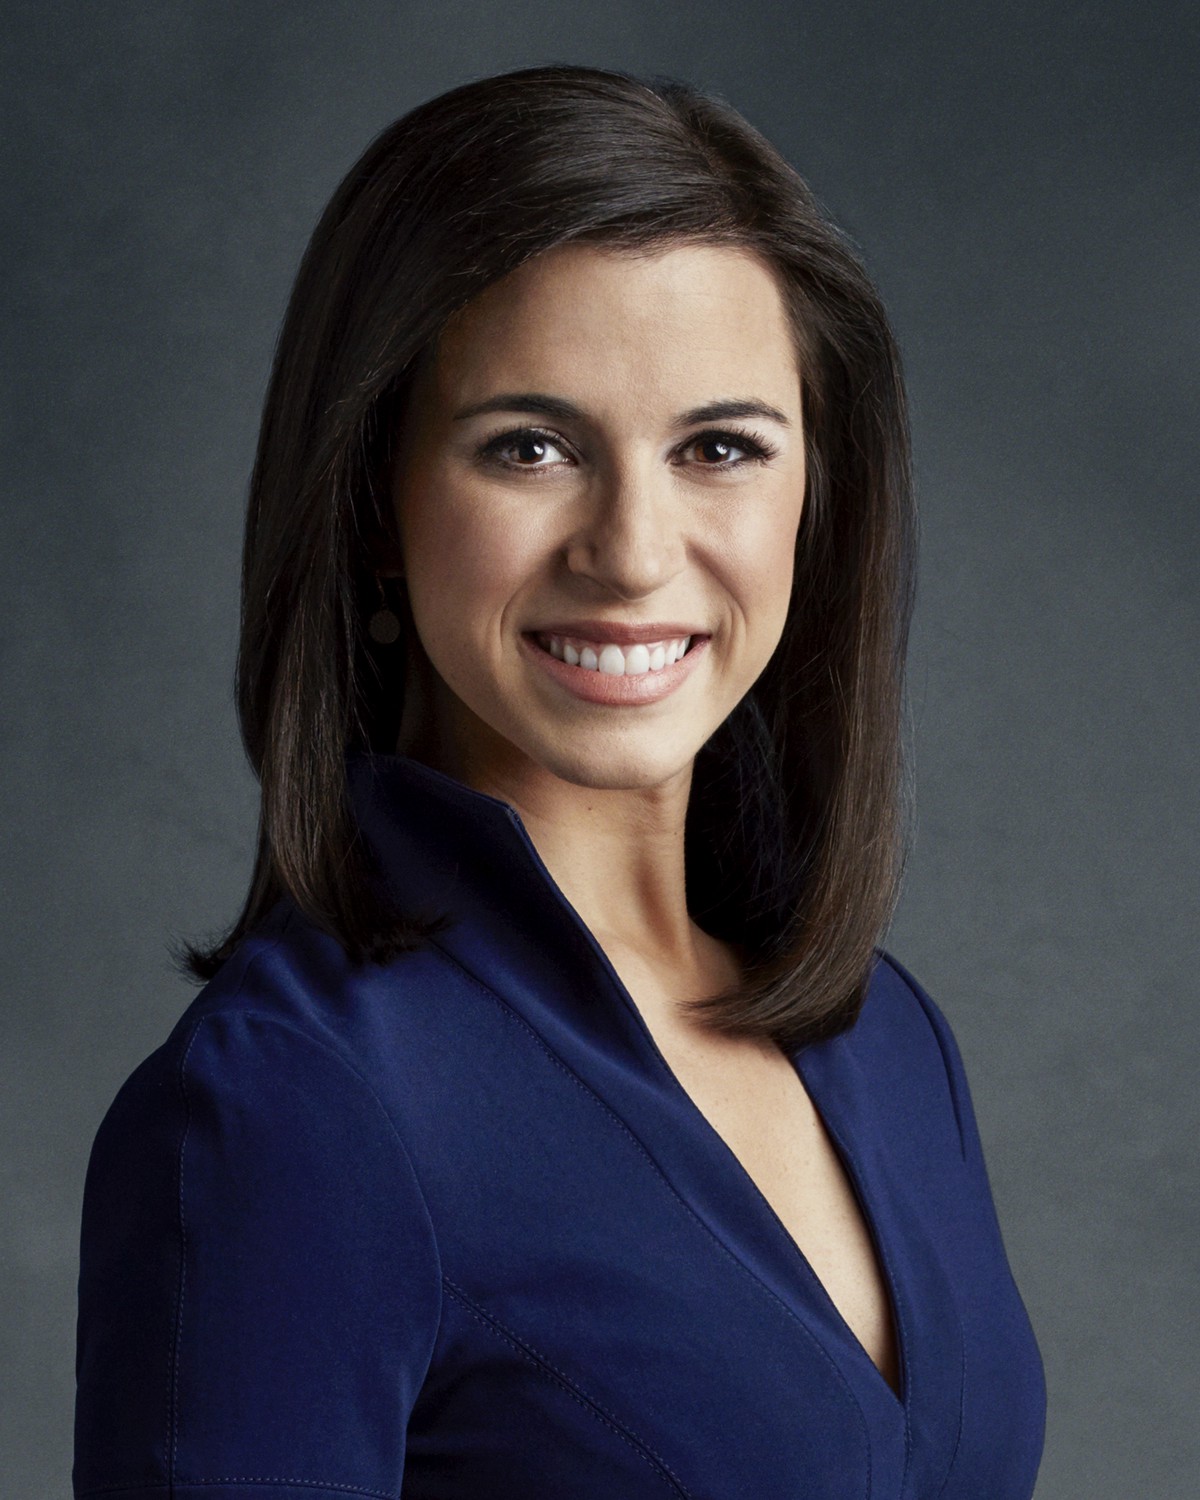 Leslie Picker is one of the most educated young news professionals in the business.